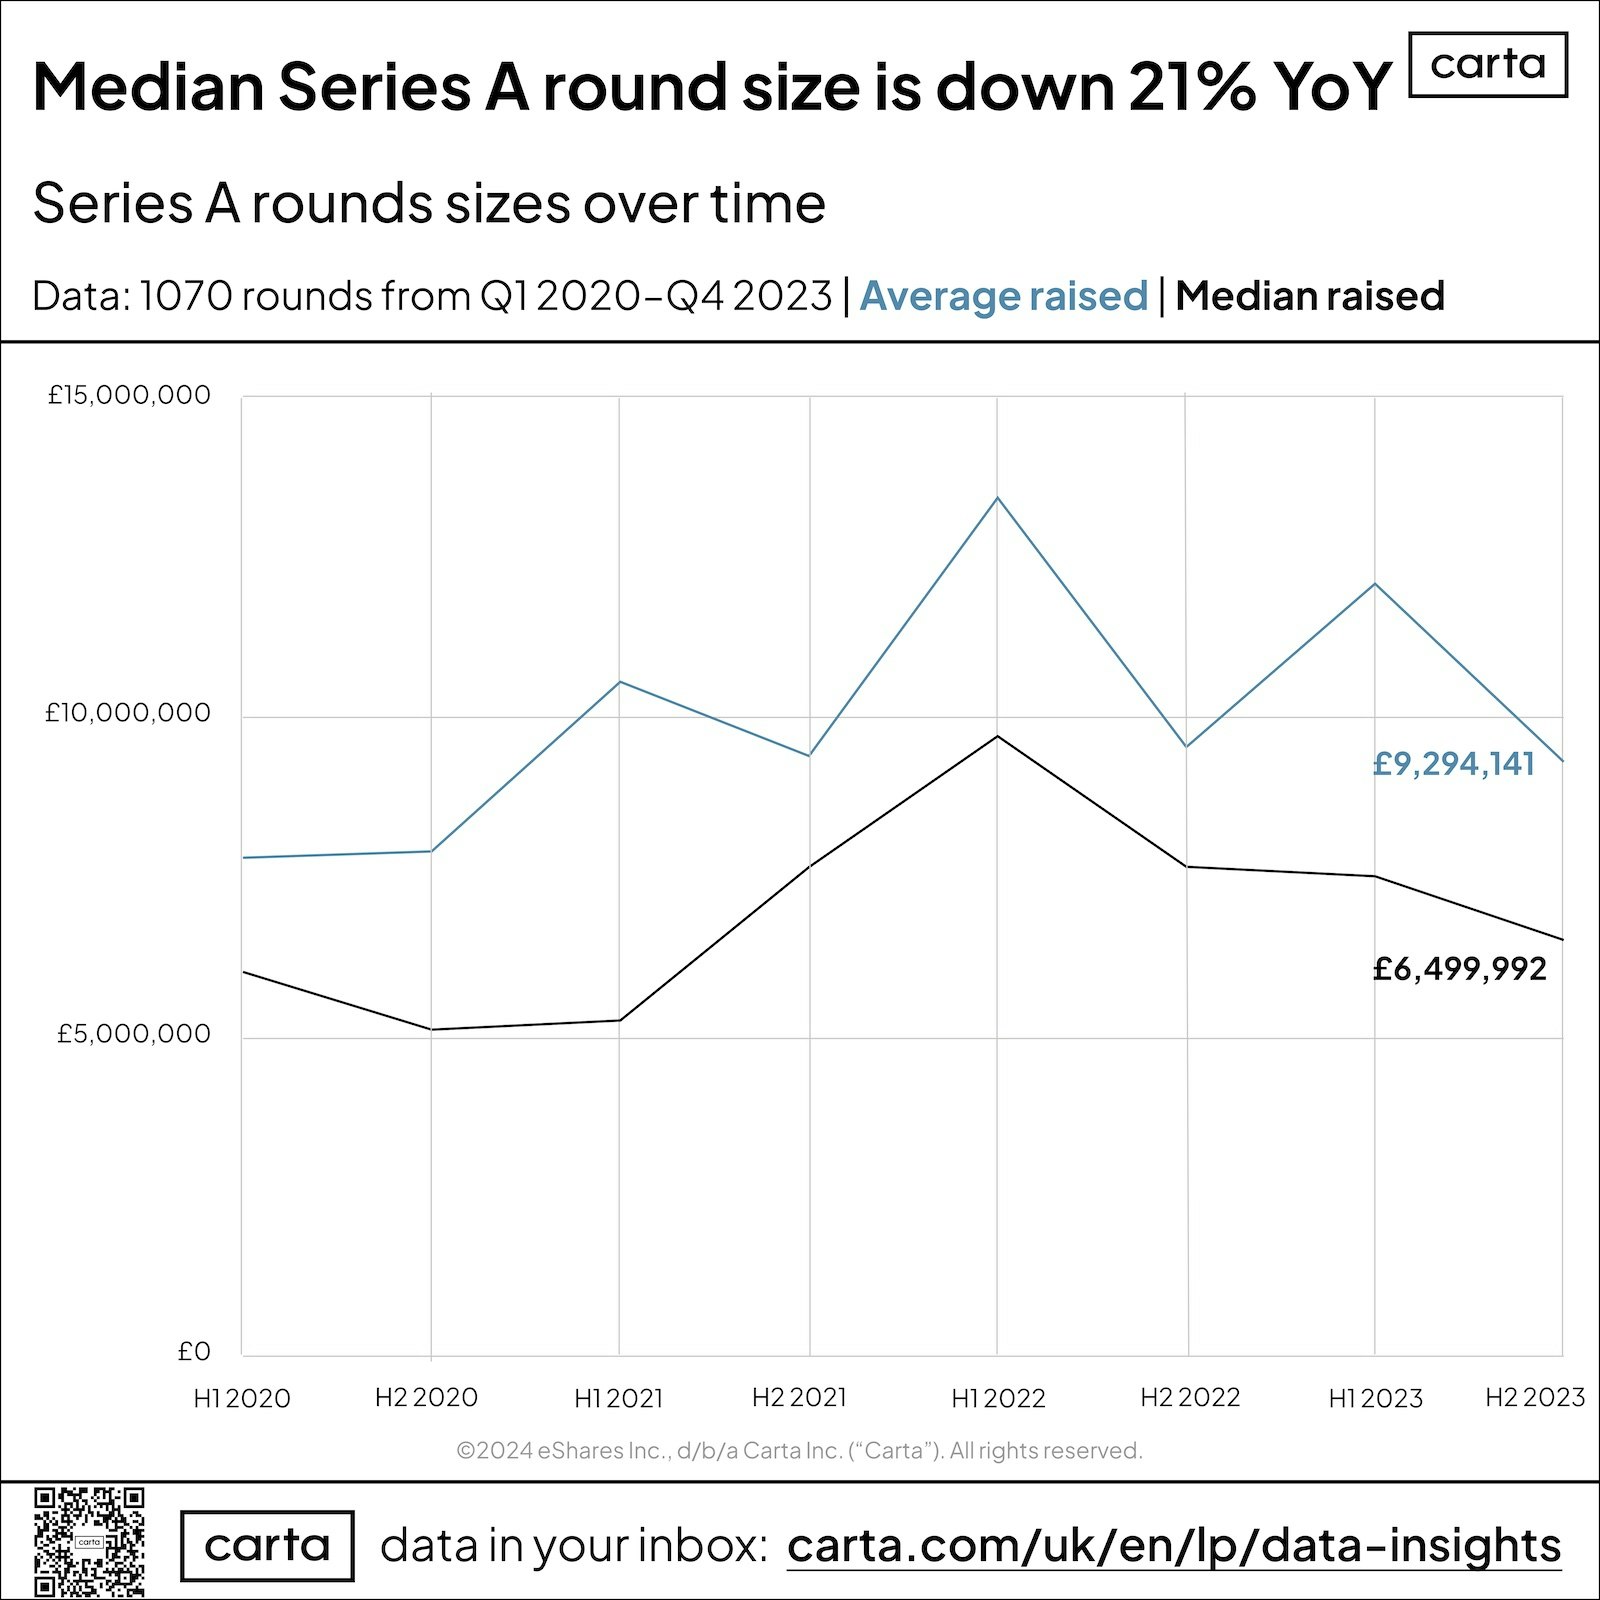 A chart from Carta showing the median and average Series As round size from 2020 to 2023. 